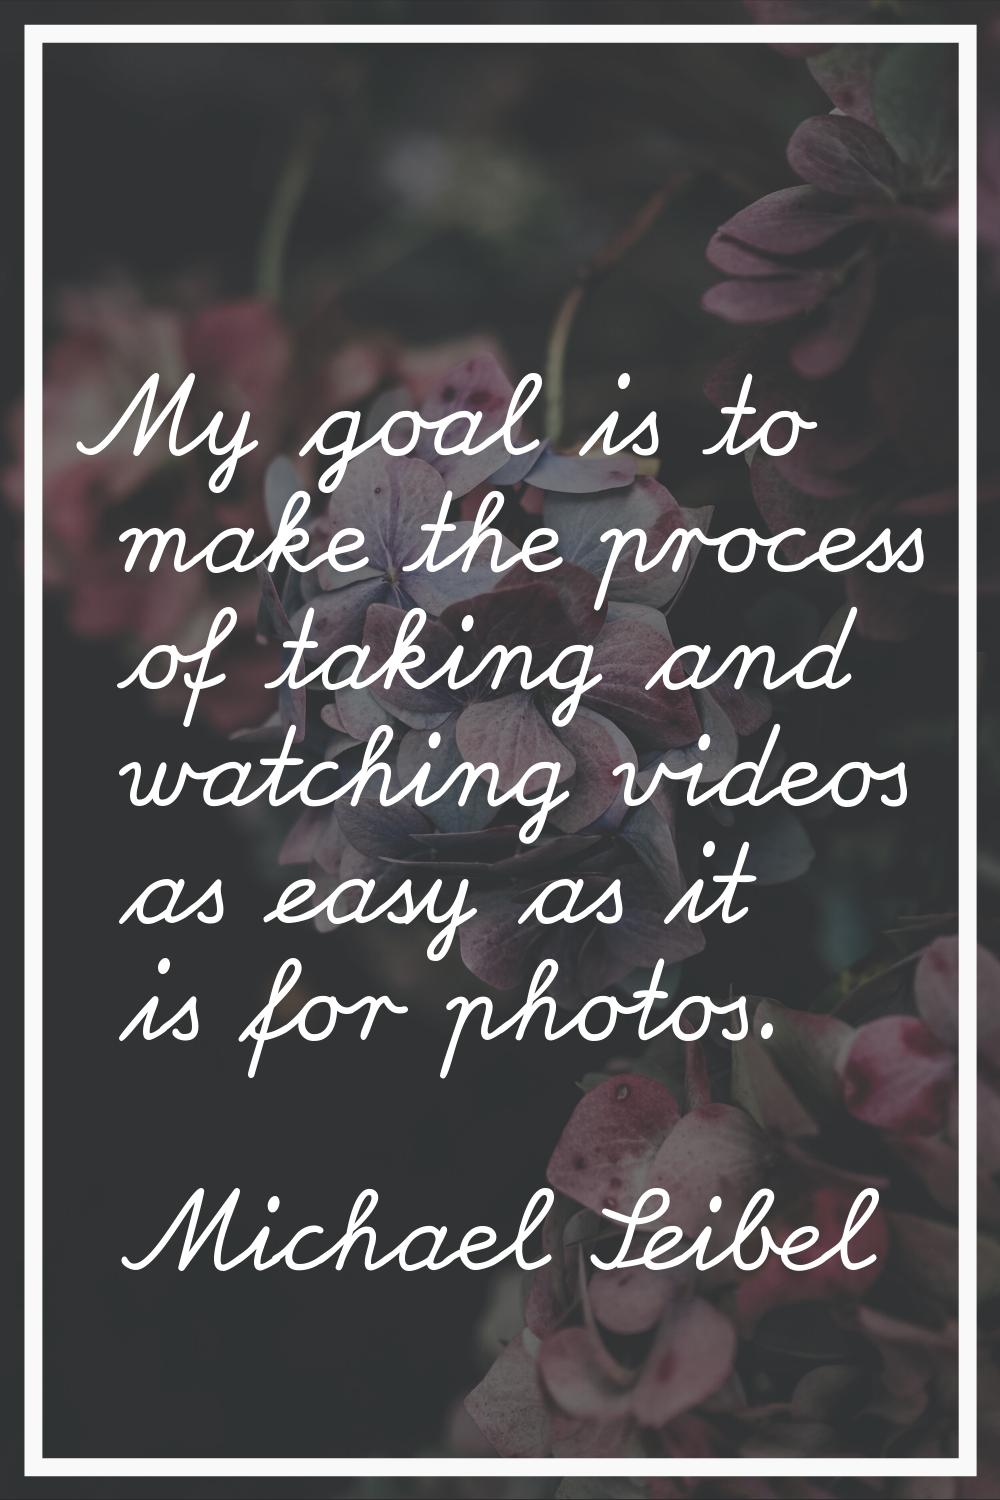 My goal is to make the process of taking and watching videos as easy as it is for photos.